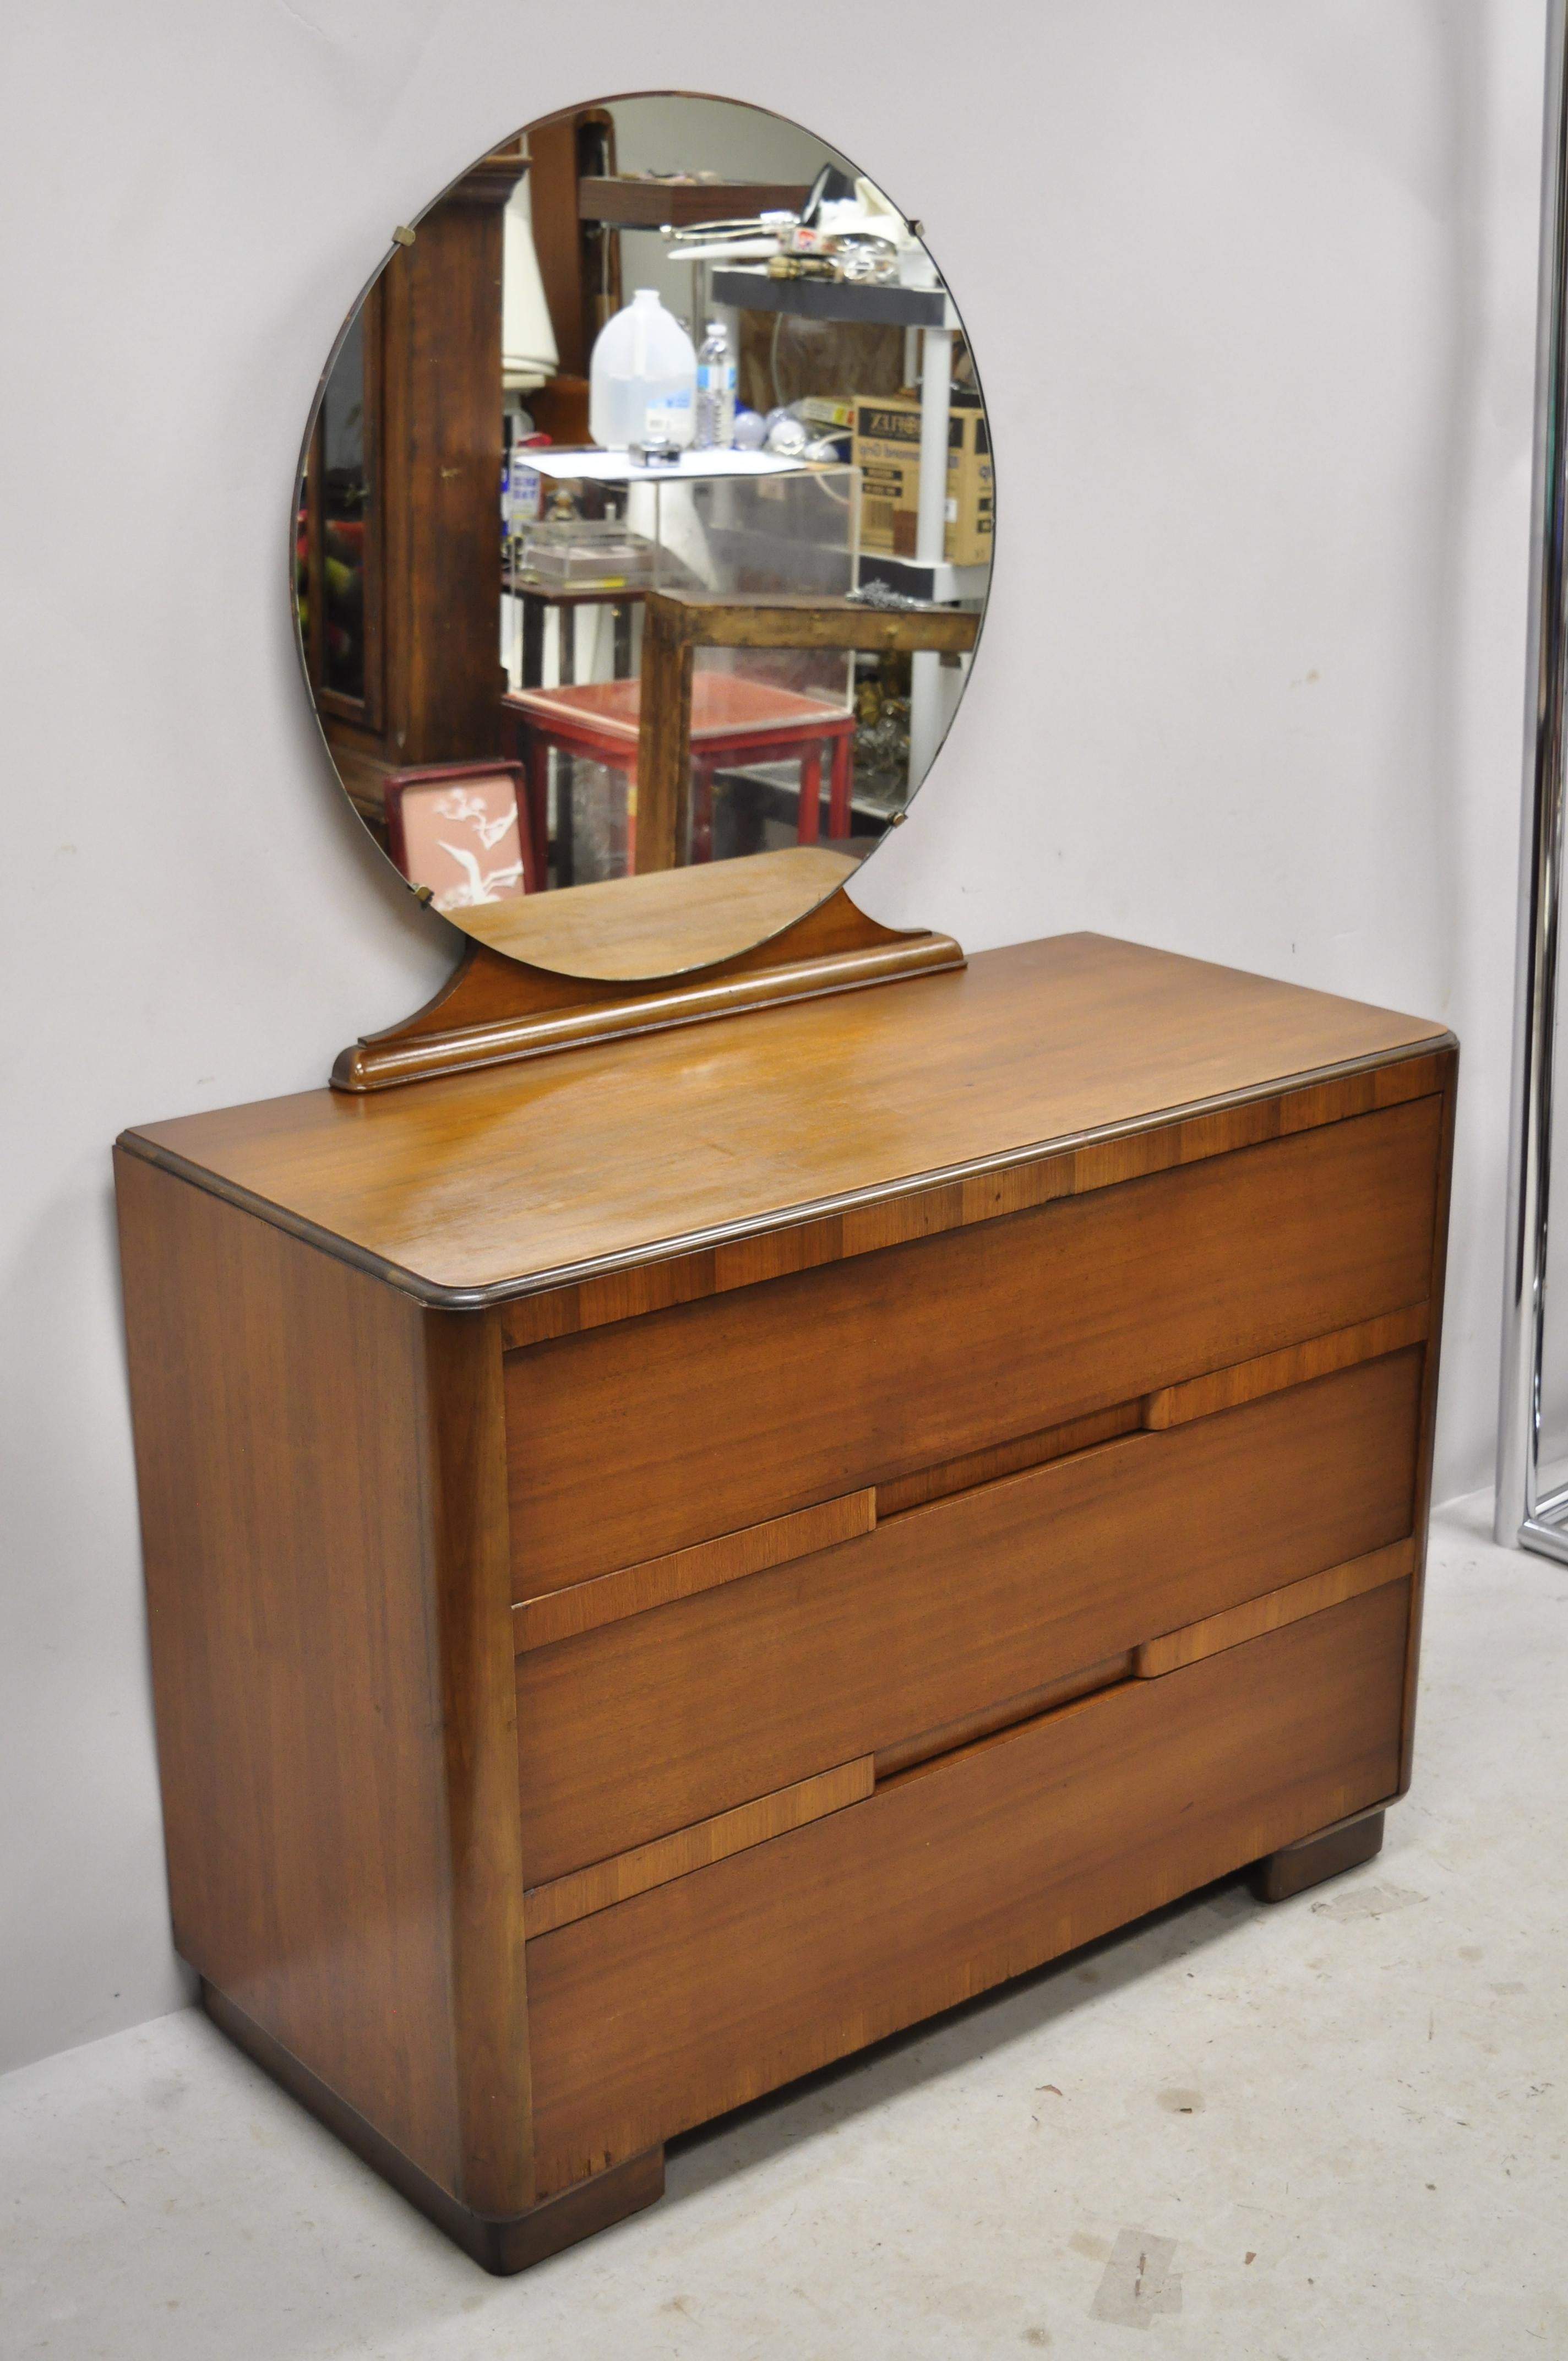 Antique Art Deco inlaid waterfall 3-drawer dresser chest with round mirror. Item features round plain glass mirror, beautiful wood grain, 3 dovetailed drawers, very nice vintage item, clean modernist lines, quality American craftsmanship, circa